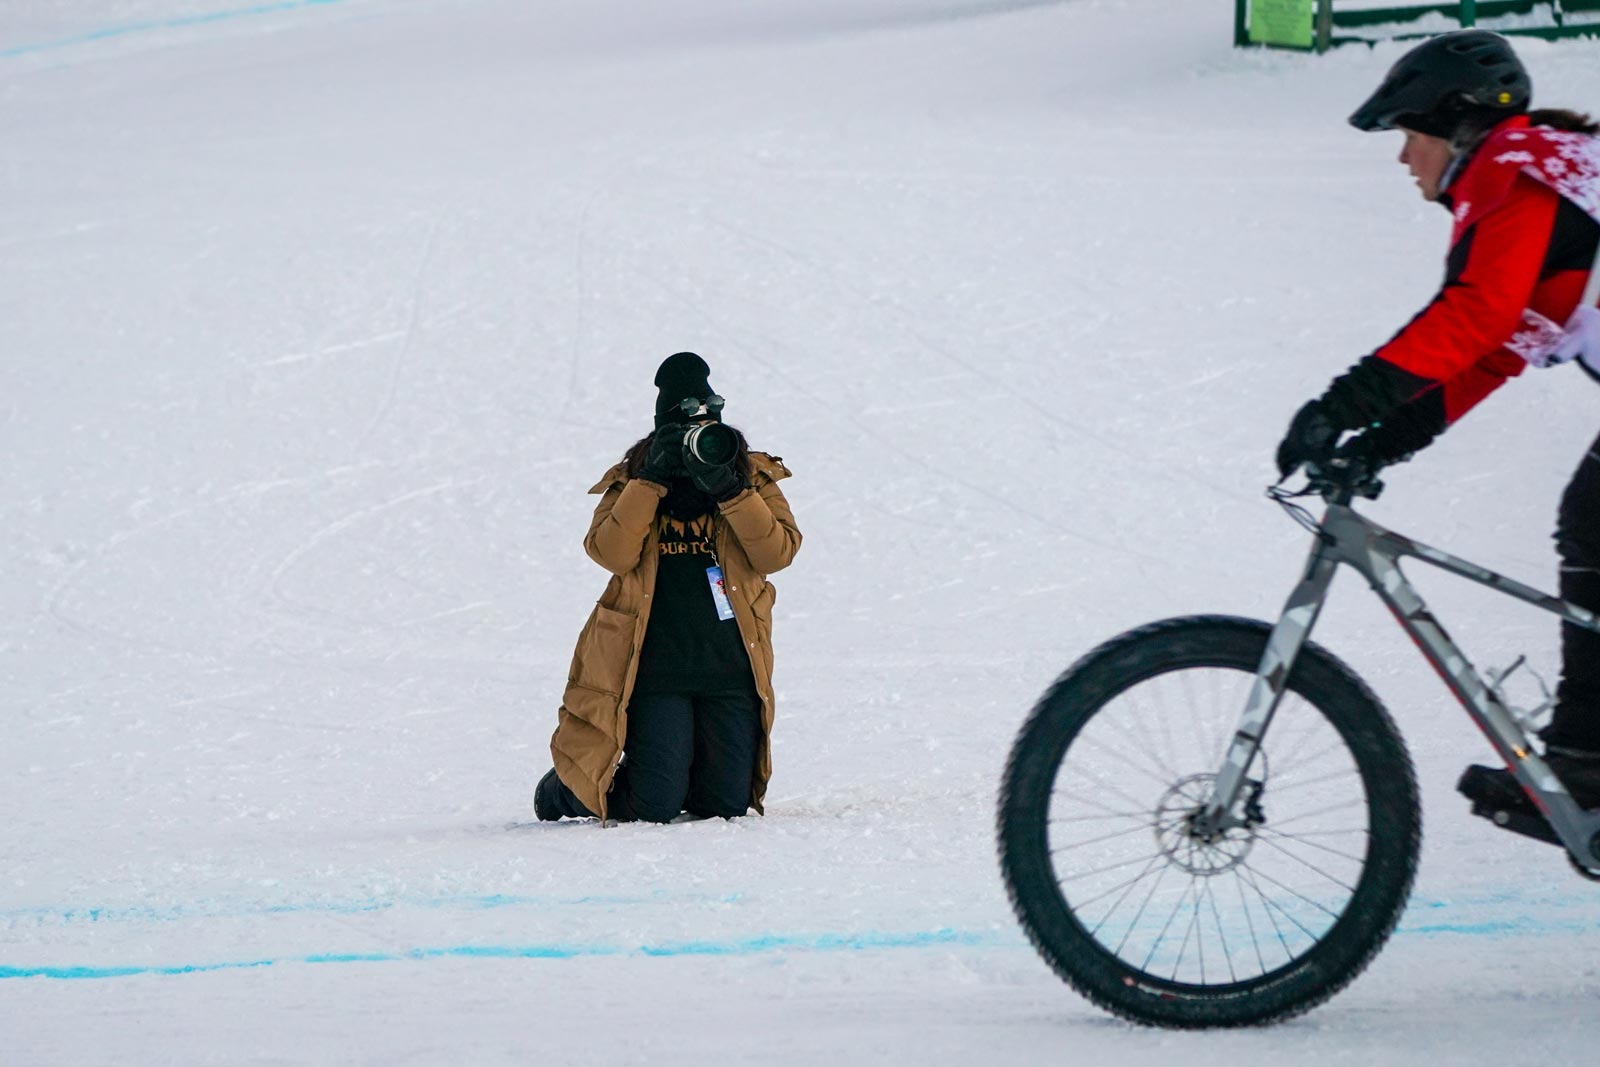 A student kneeling on the snow, taking a picture of a bicyclist racing past.